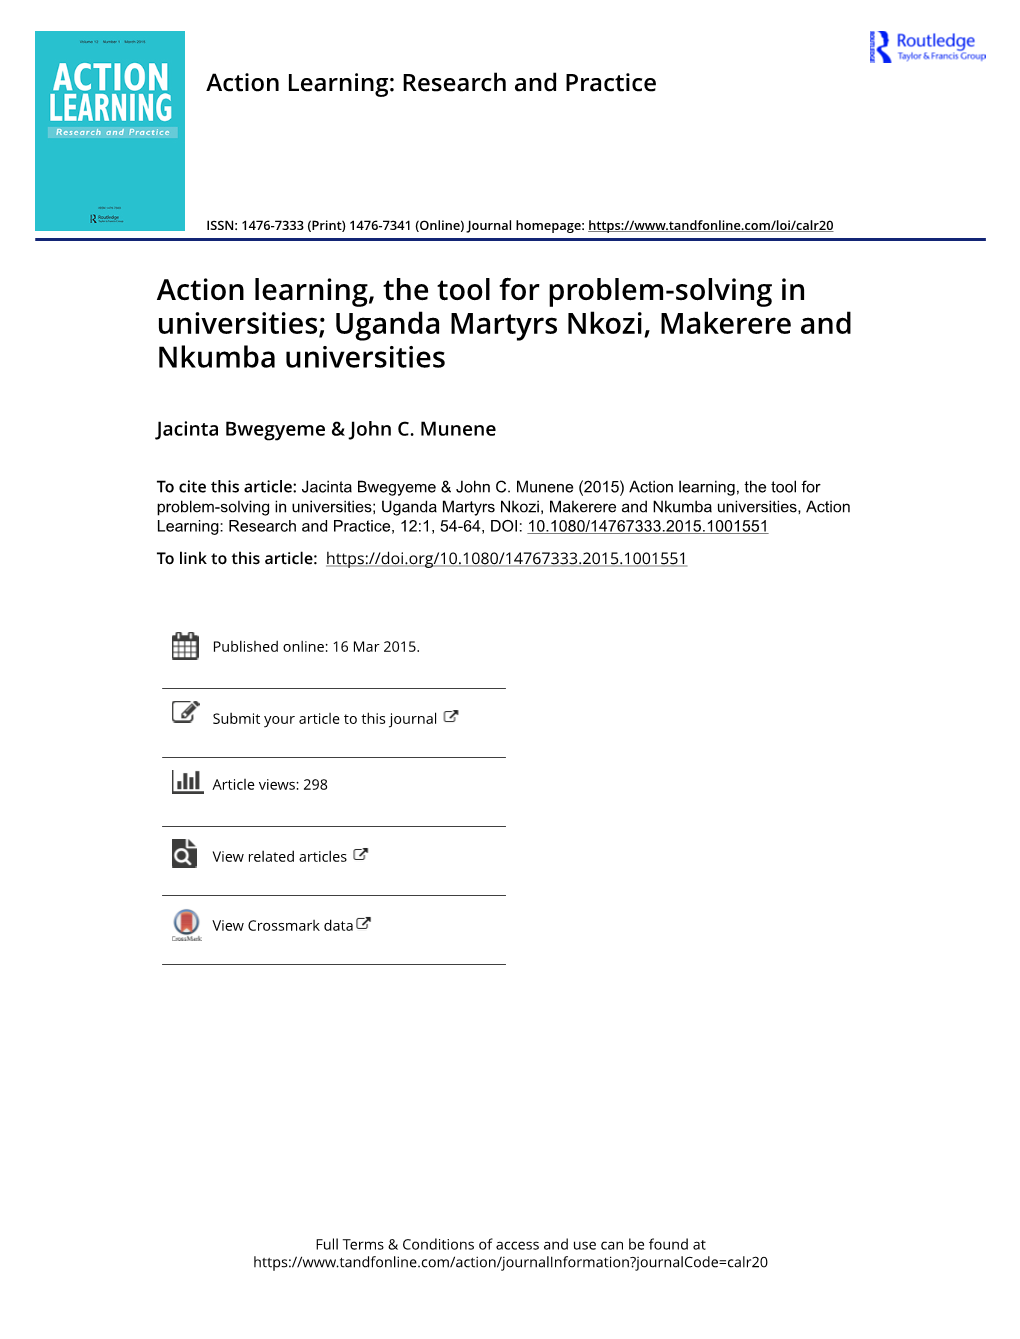 Action Learning, the Tool for Problem-Solving in Universities; Uganda Martyrs Nkozi, Makerere and Nkumba Universities